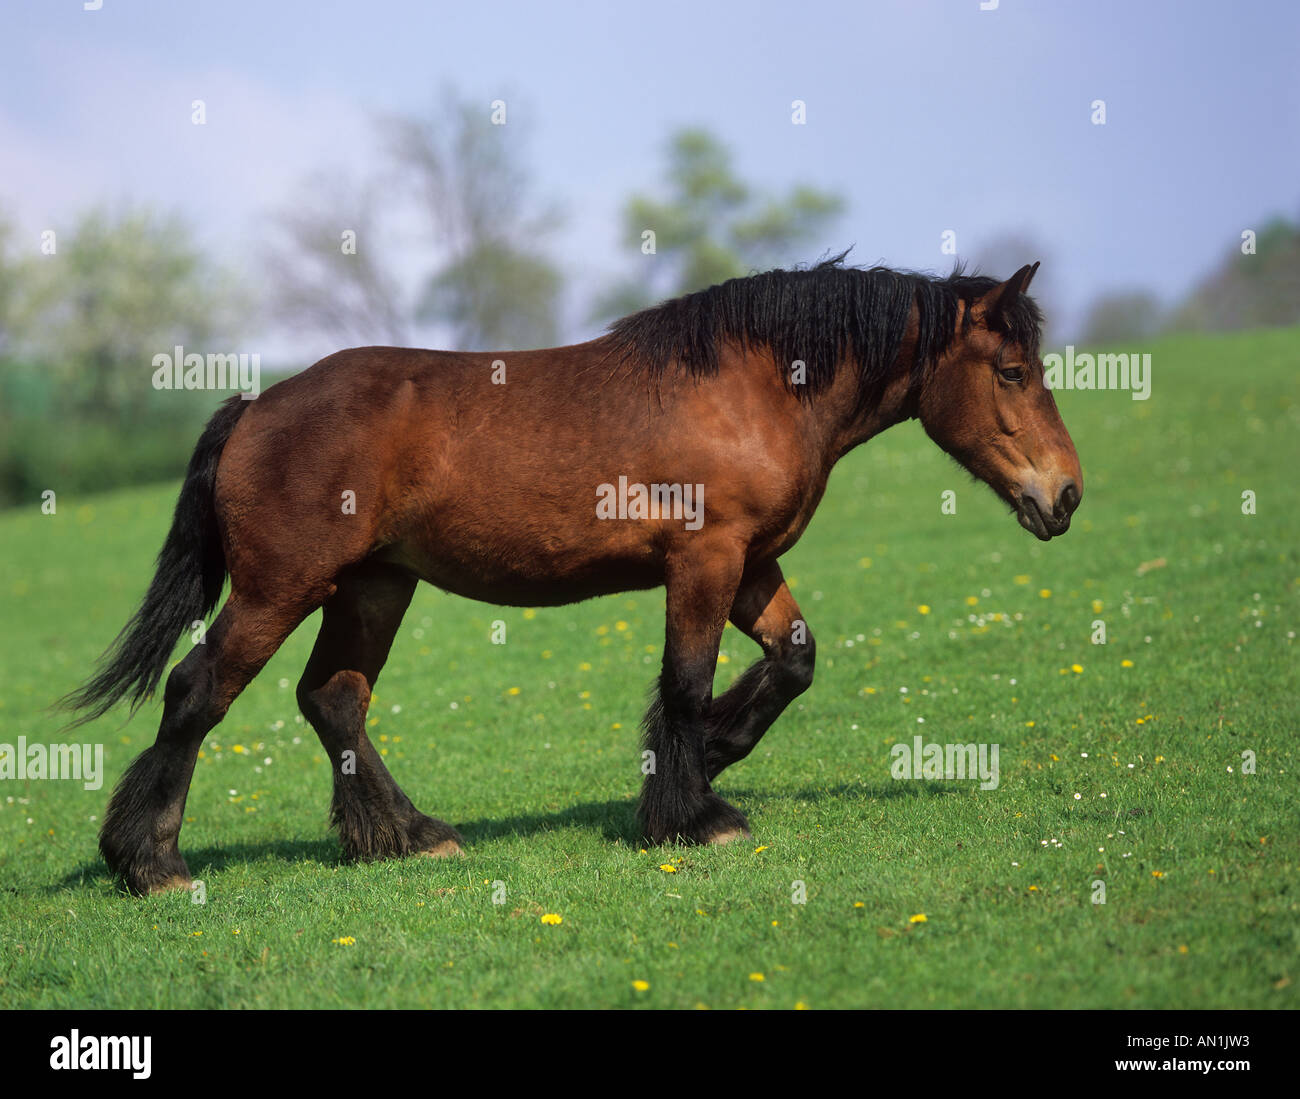 Ardennes horse on blue sky stock photo. Image of dray - 7500106